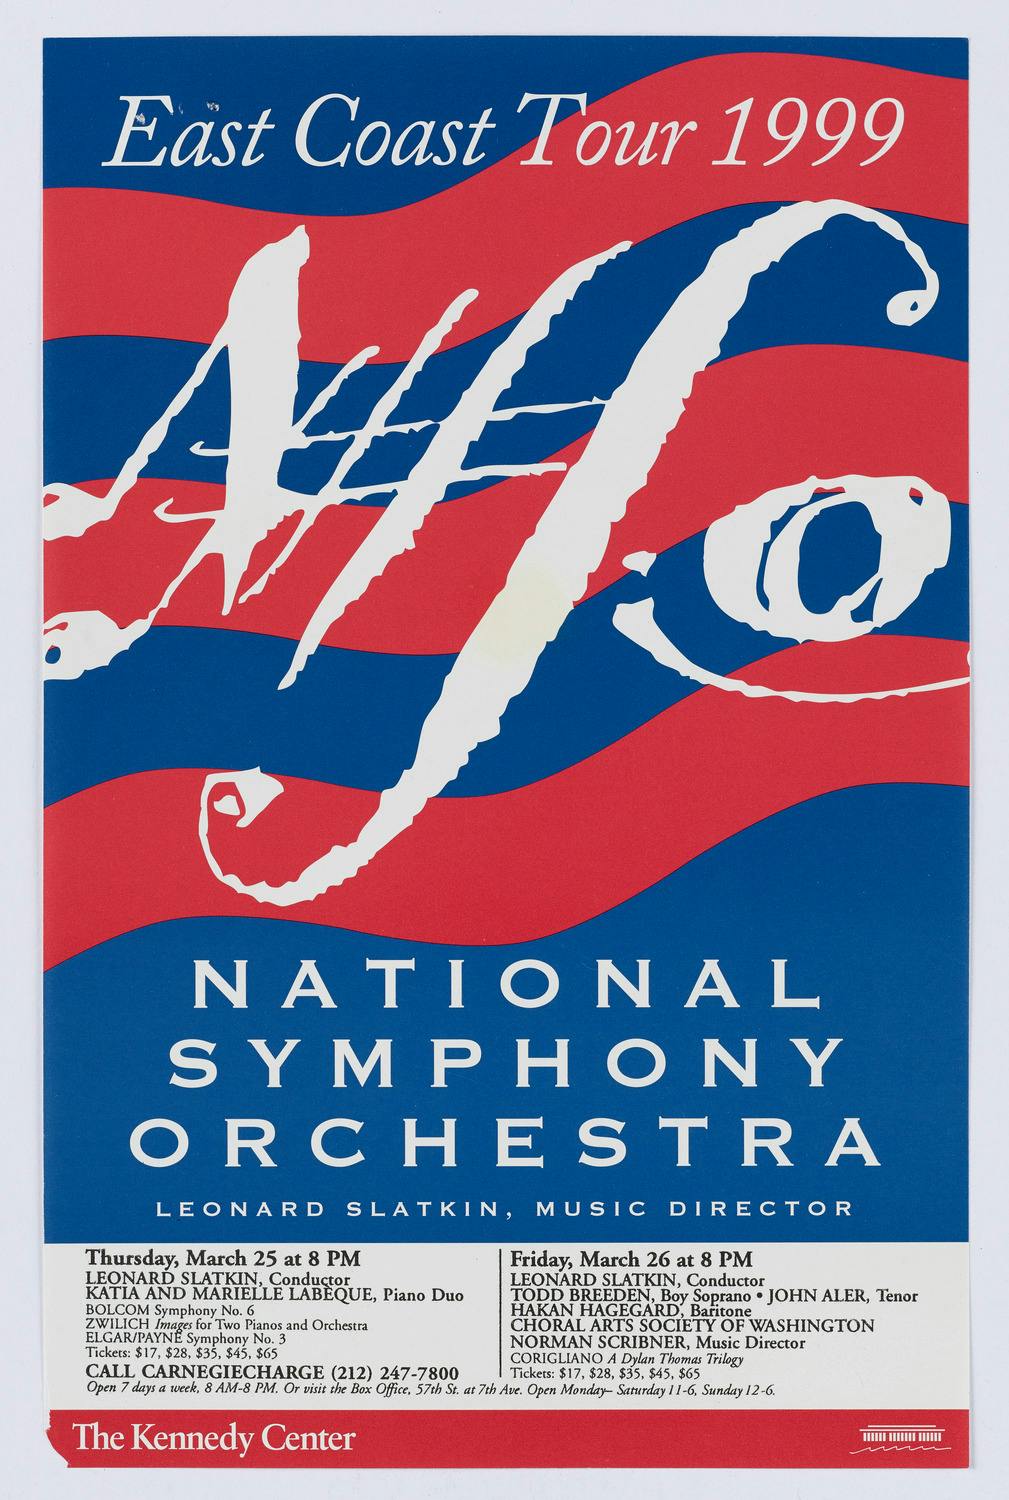 Five Things to Know About the National Symphony Orchestra Carnegie Hall